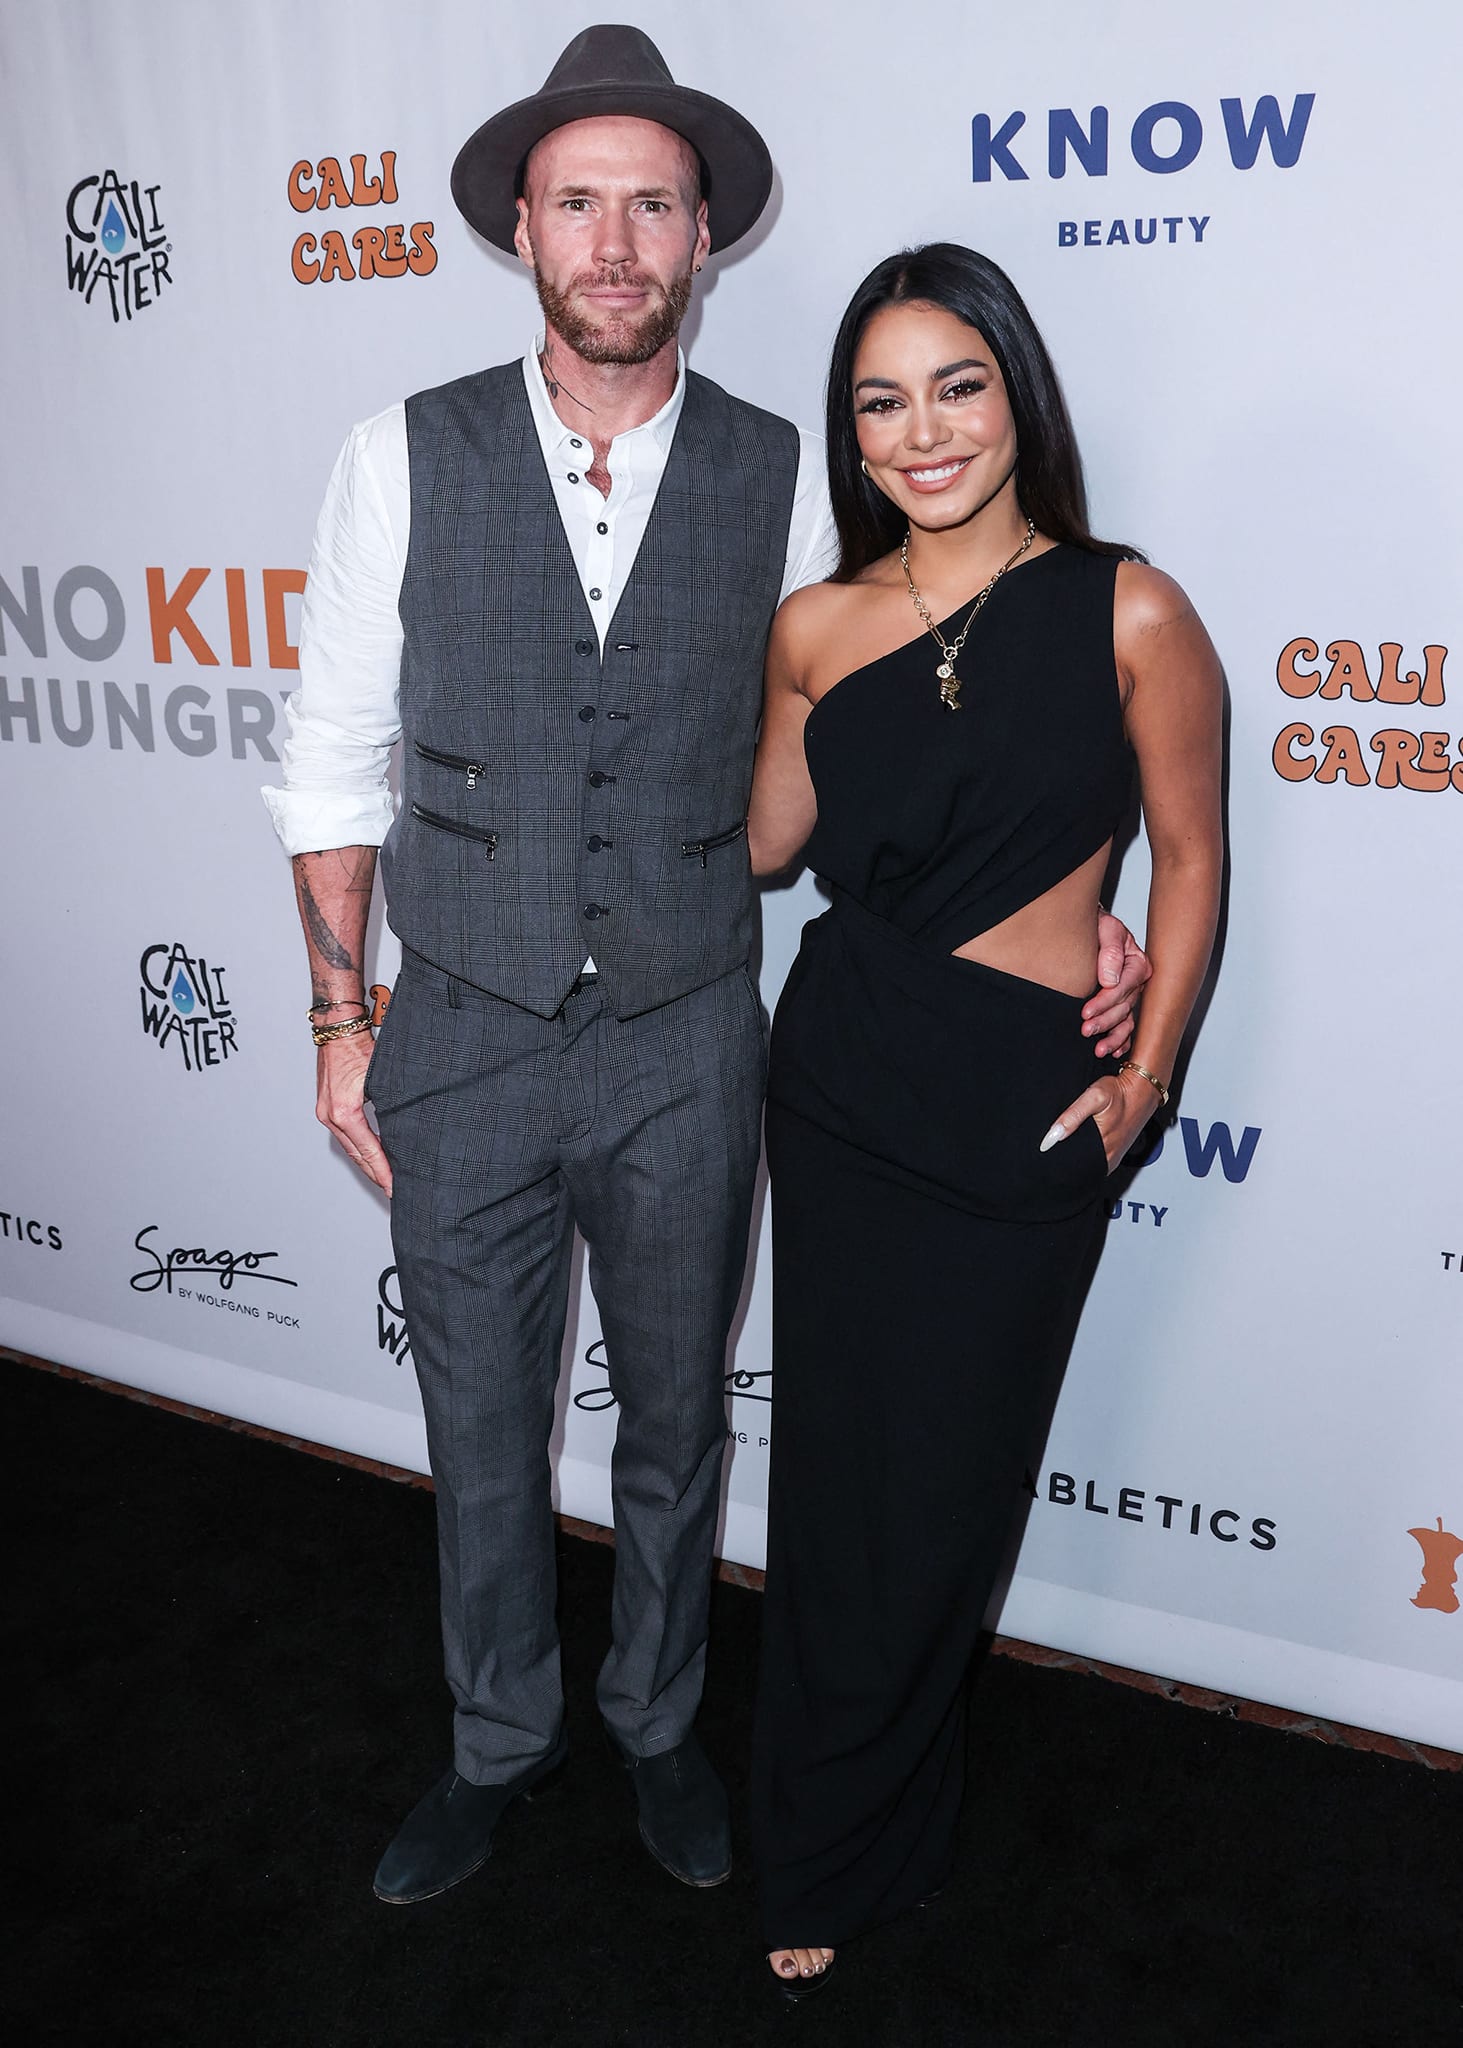 Caliwater co-founder Oliver Trevena joins Vanessa Hudgens on the black carpet in a patterned gray vest, white shirt, and a hat